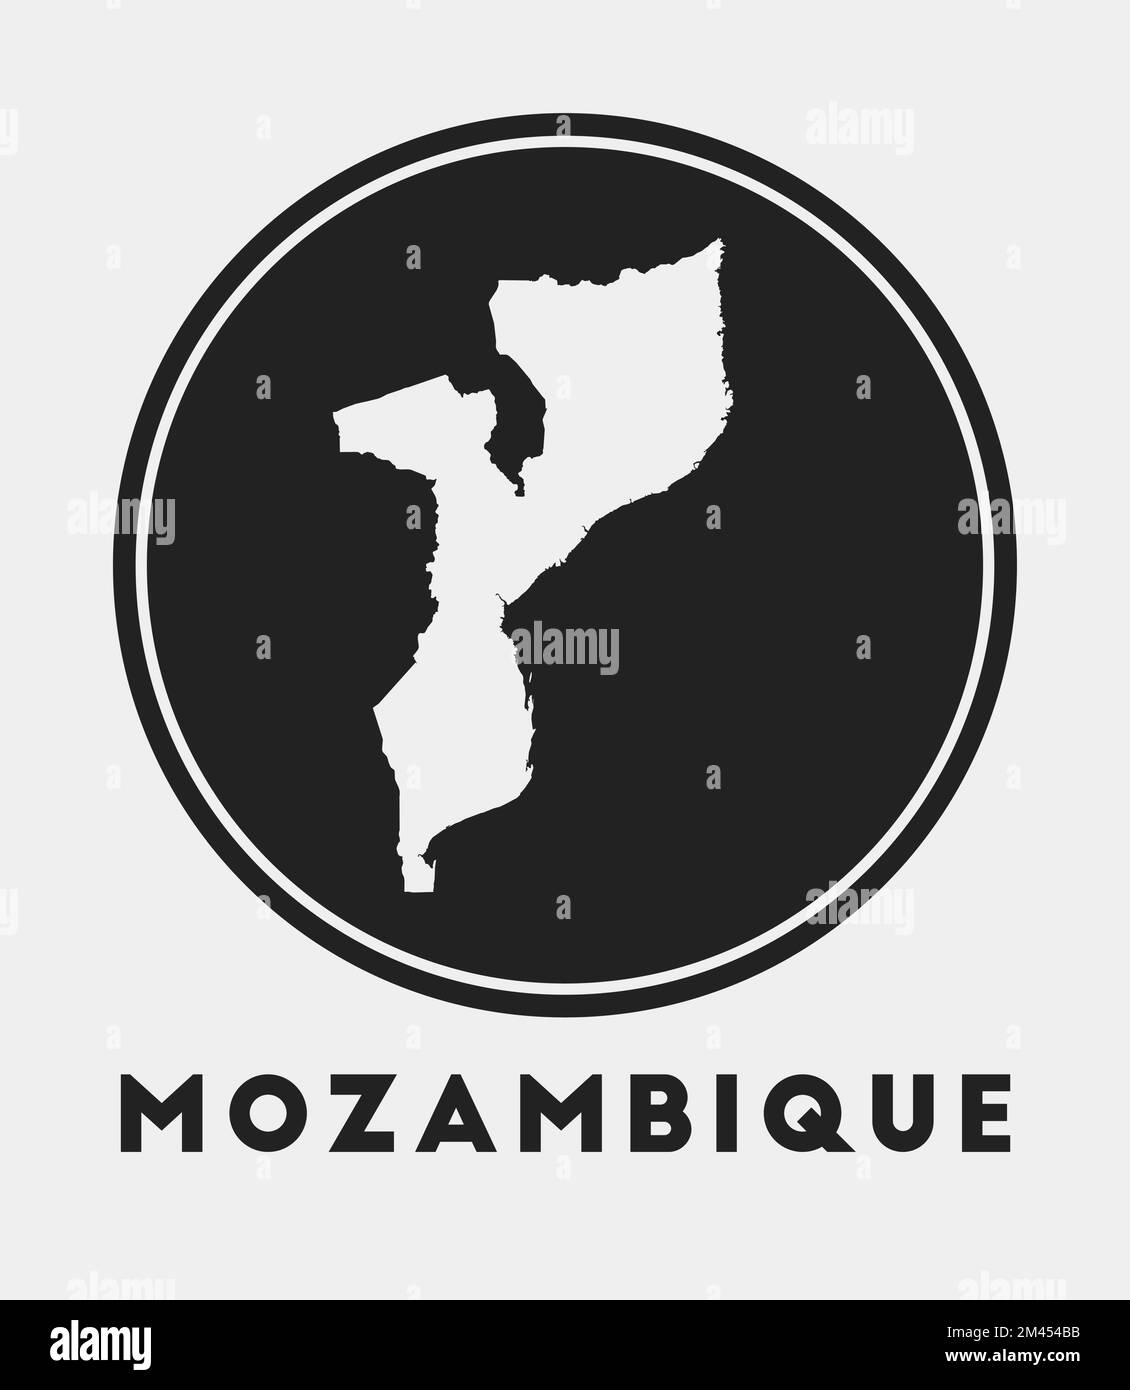 Mozambique icon. Round logo with country map and title. Stylish ...